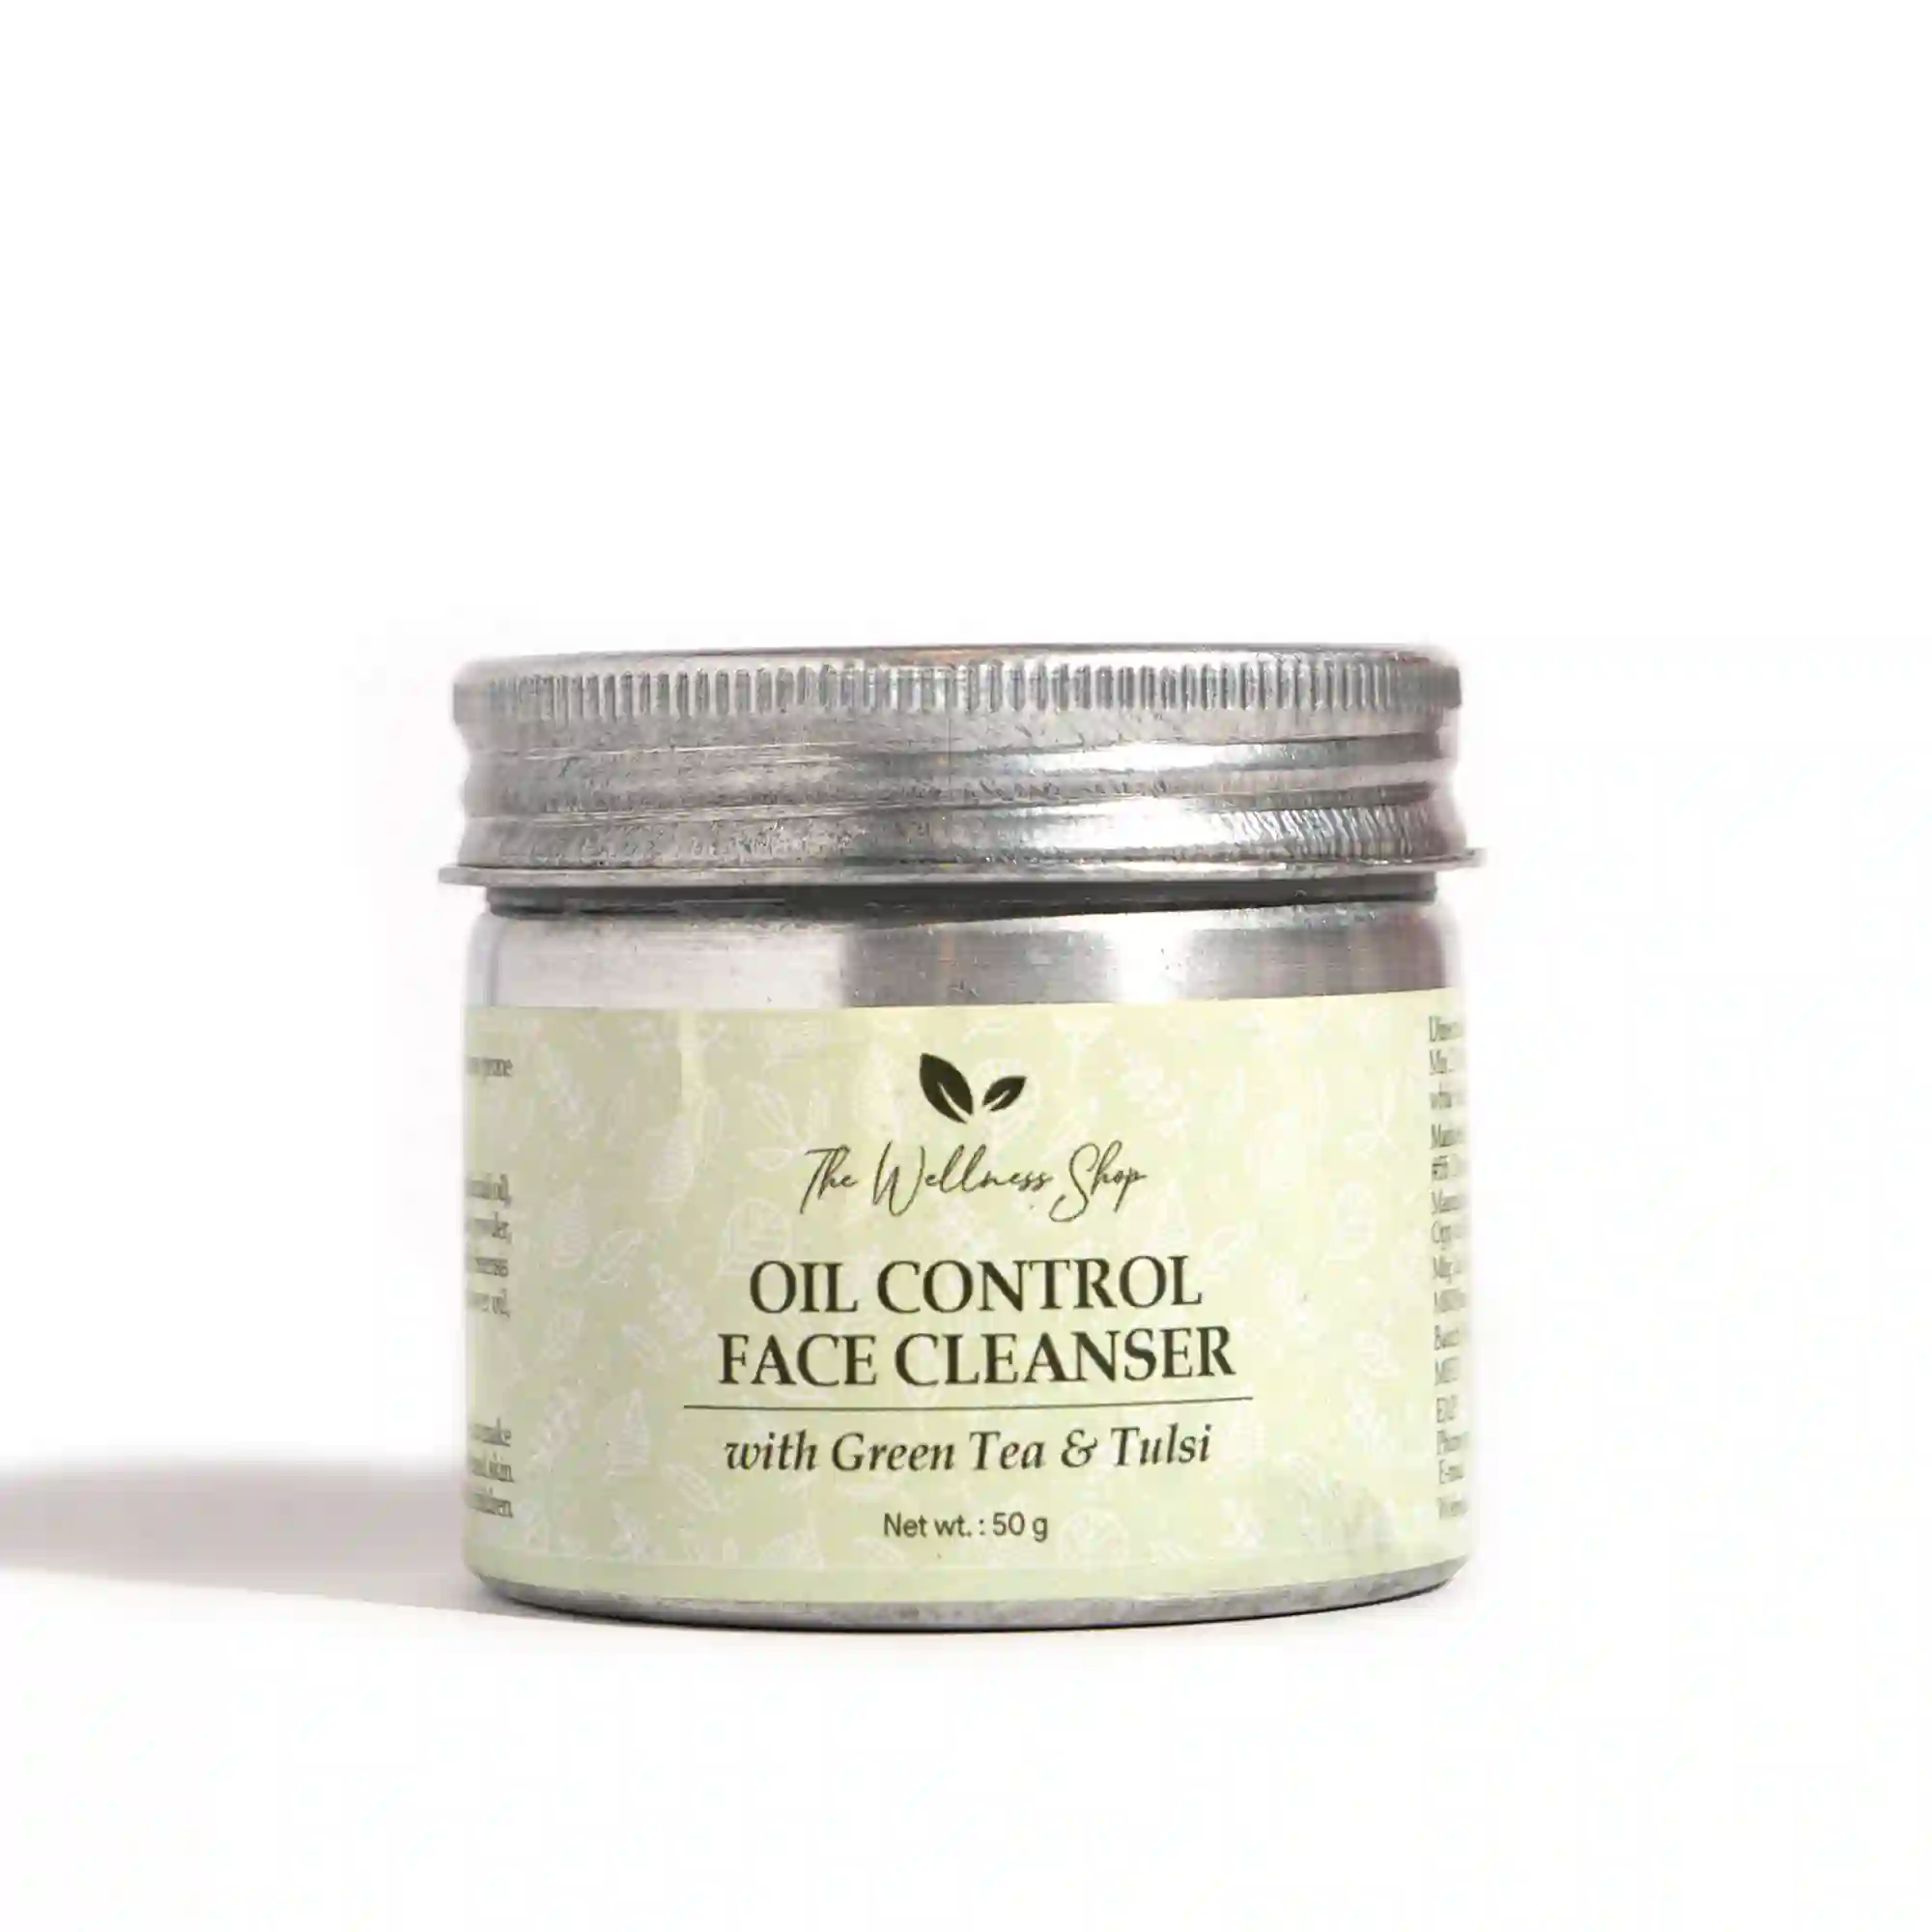 The Wellness Shop Oil Control Face Cleanser